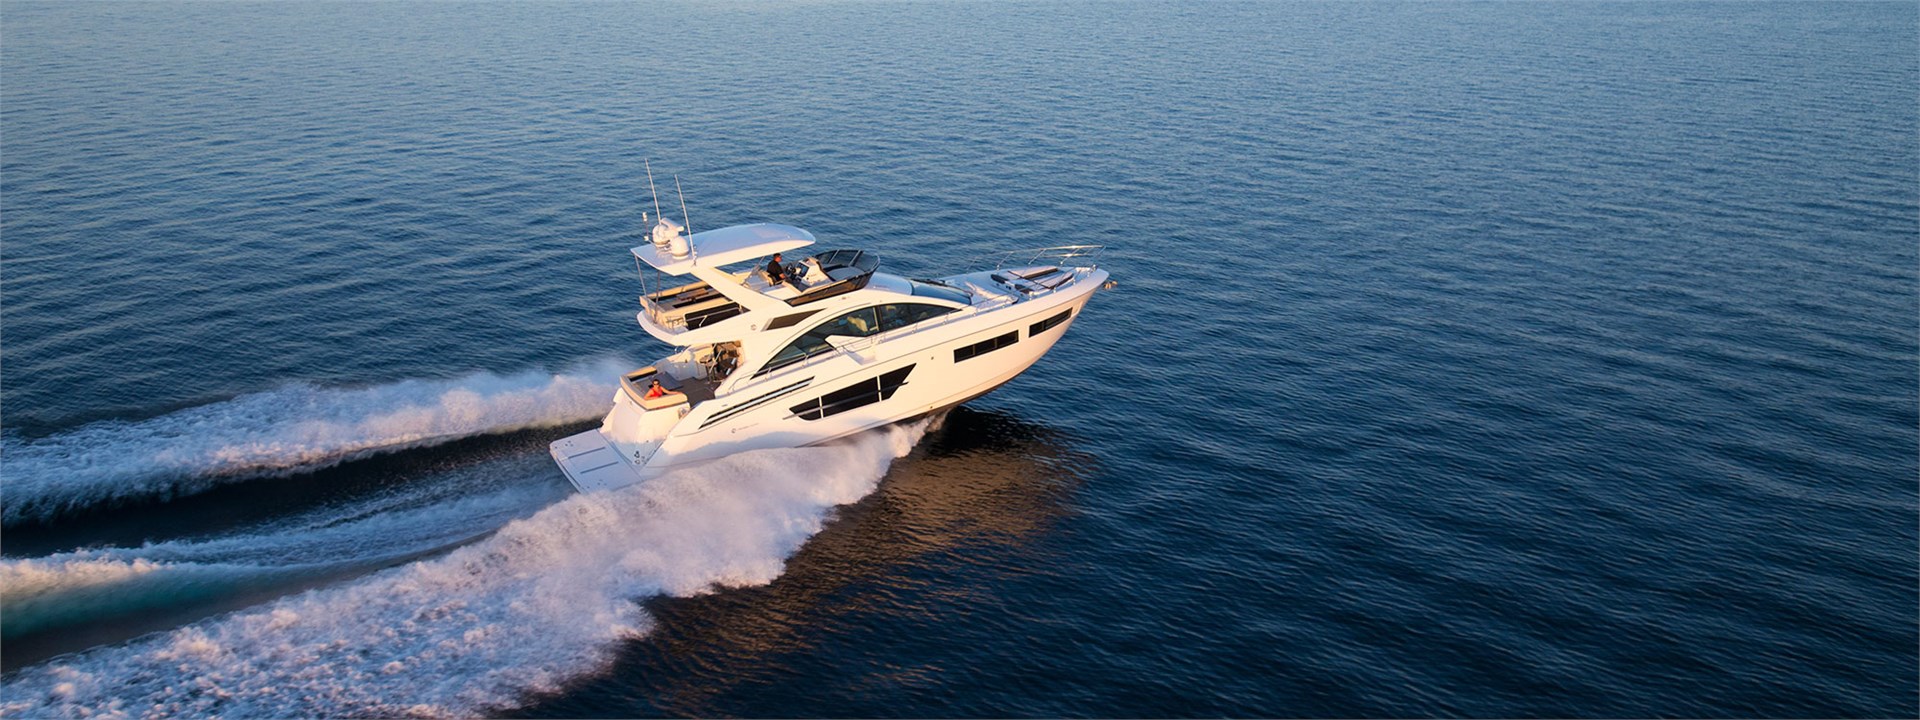 Water Shot of a Cruiser Yachts 60 Fly